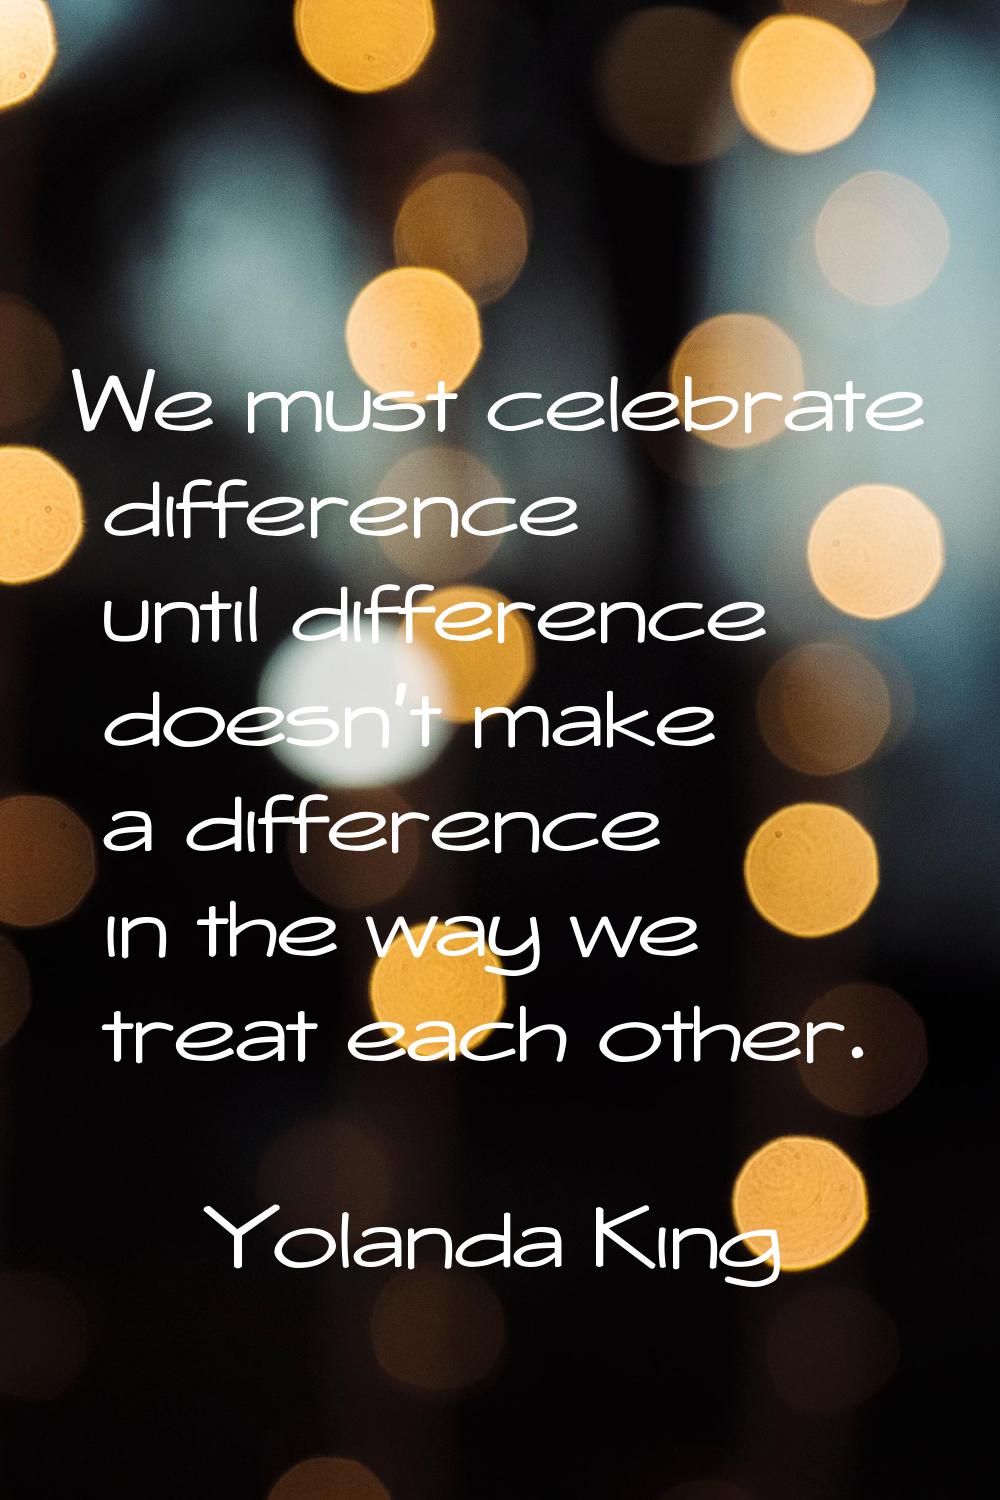 We must celebrate difference until difference doesn't make a difference in the way we treat each ot